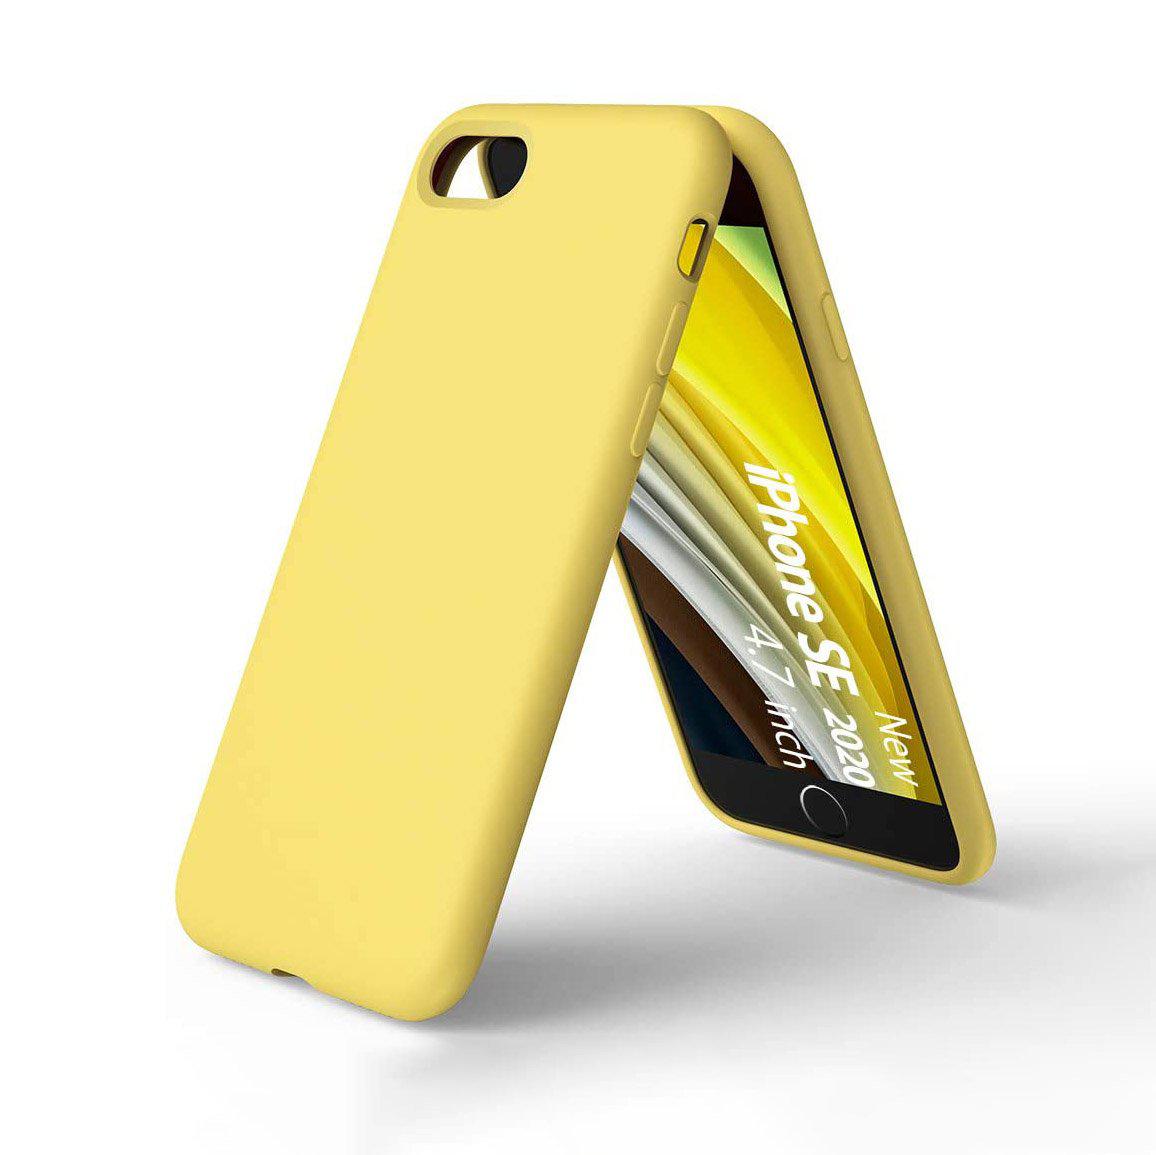 Liquid Silicone Case For Apple iPhone SE 2020 Luxury Thin Phone Cover Yellow